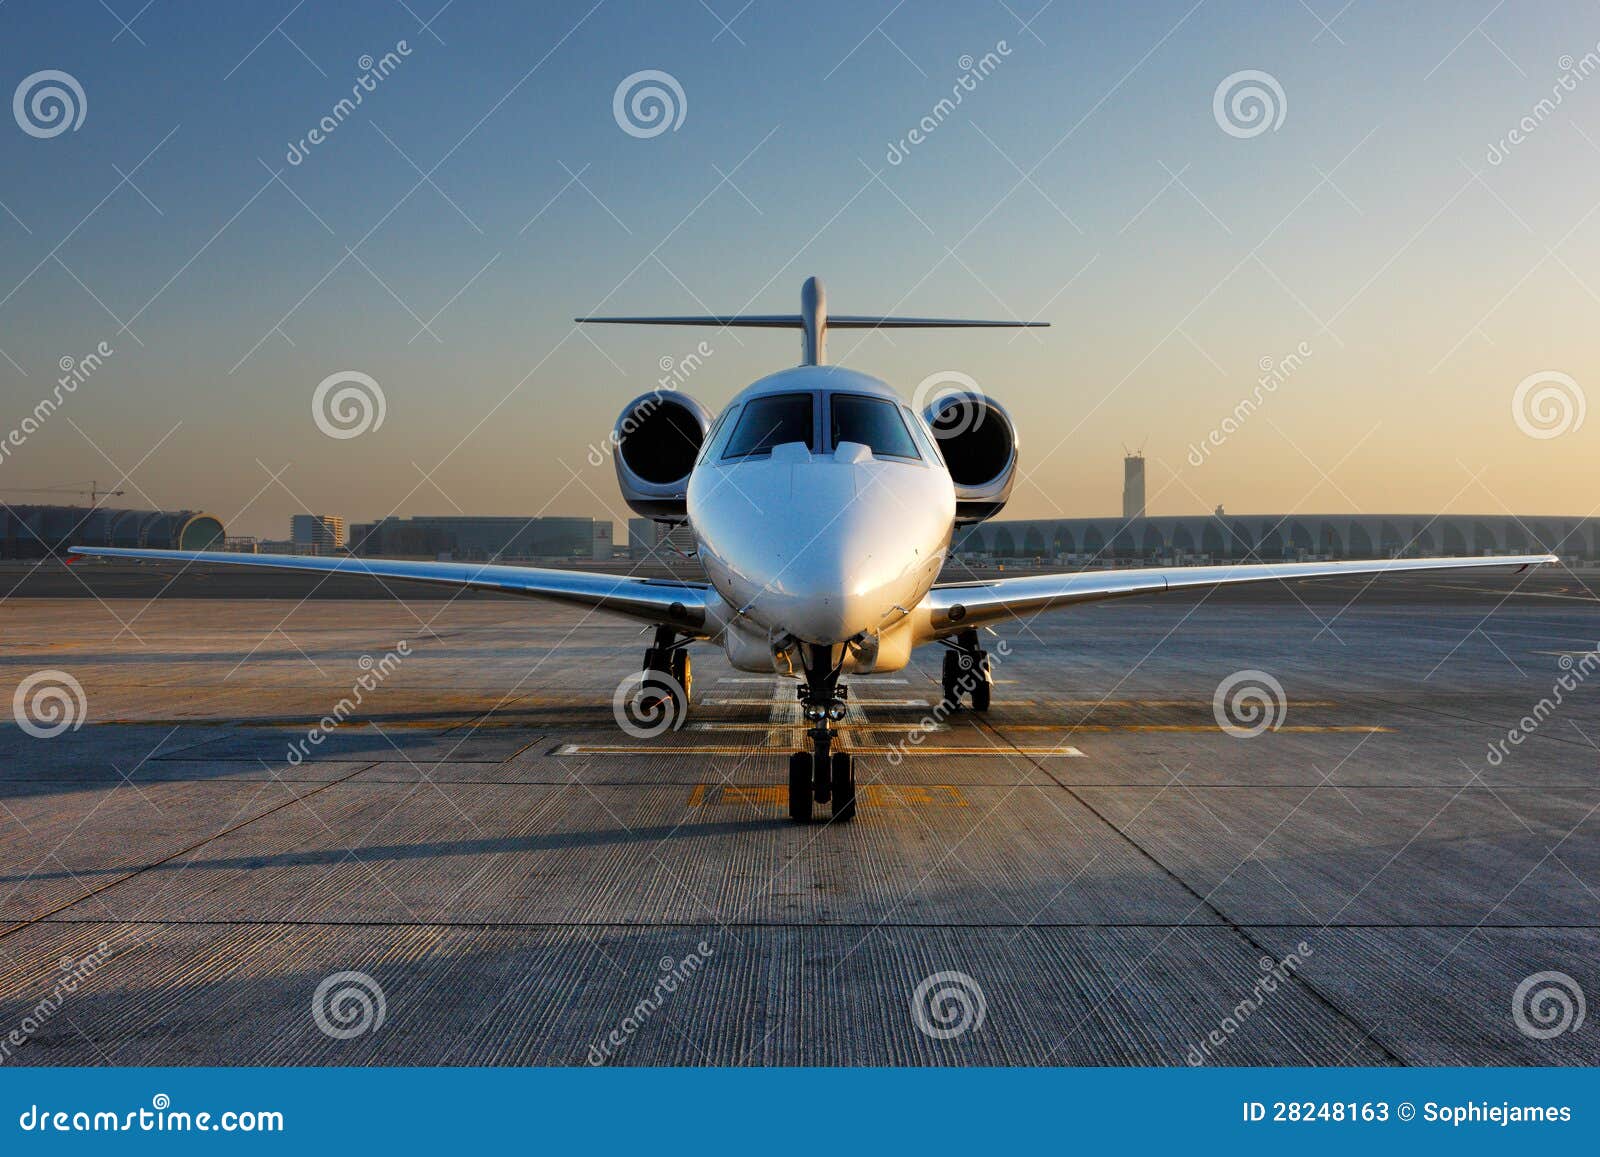 a front on view of a private jet